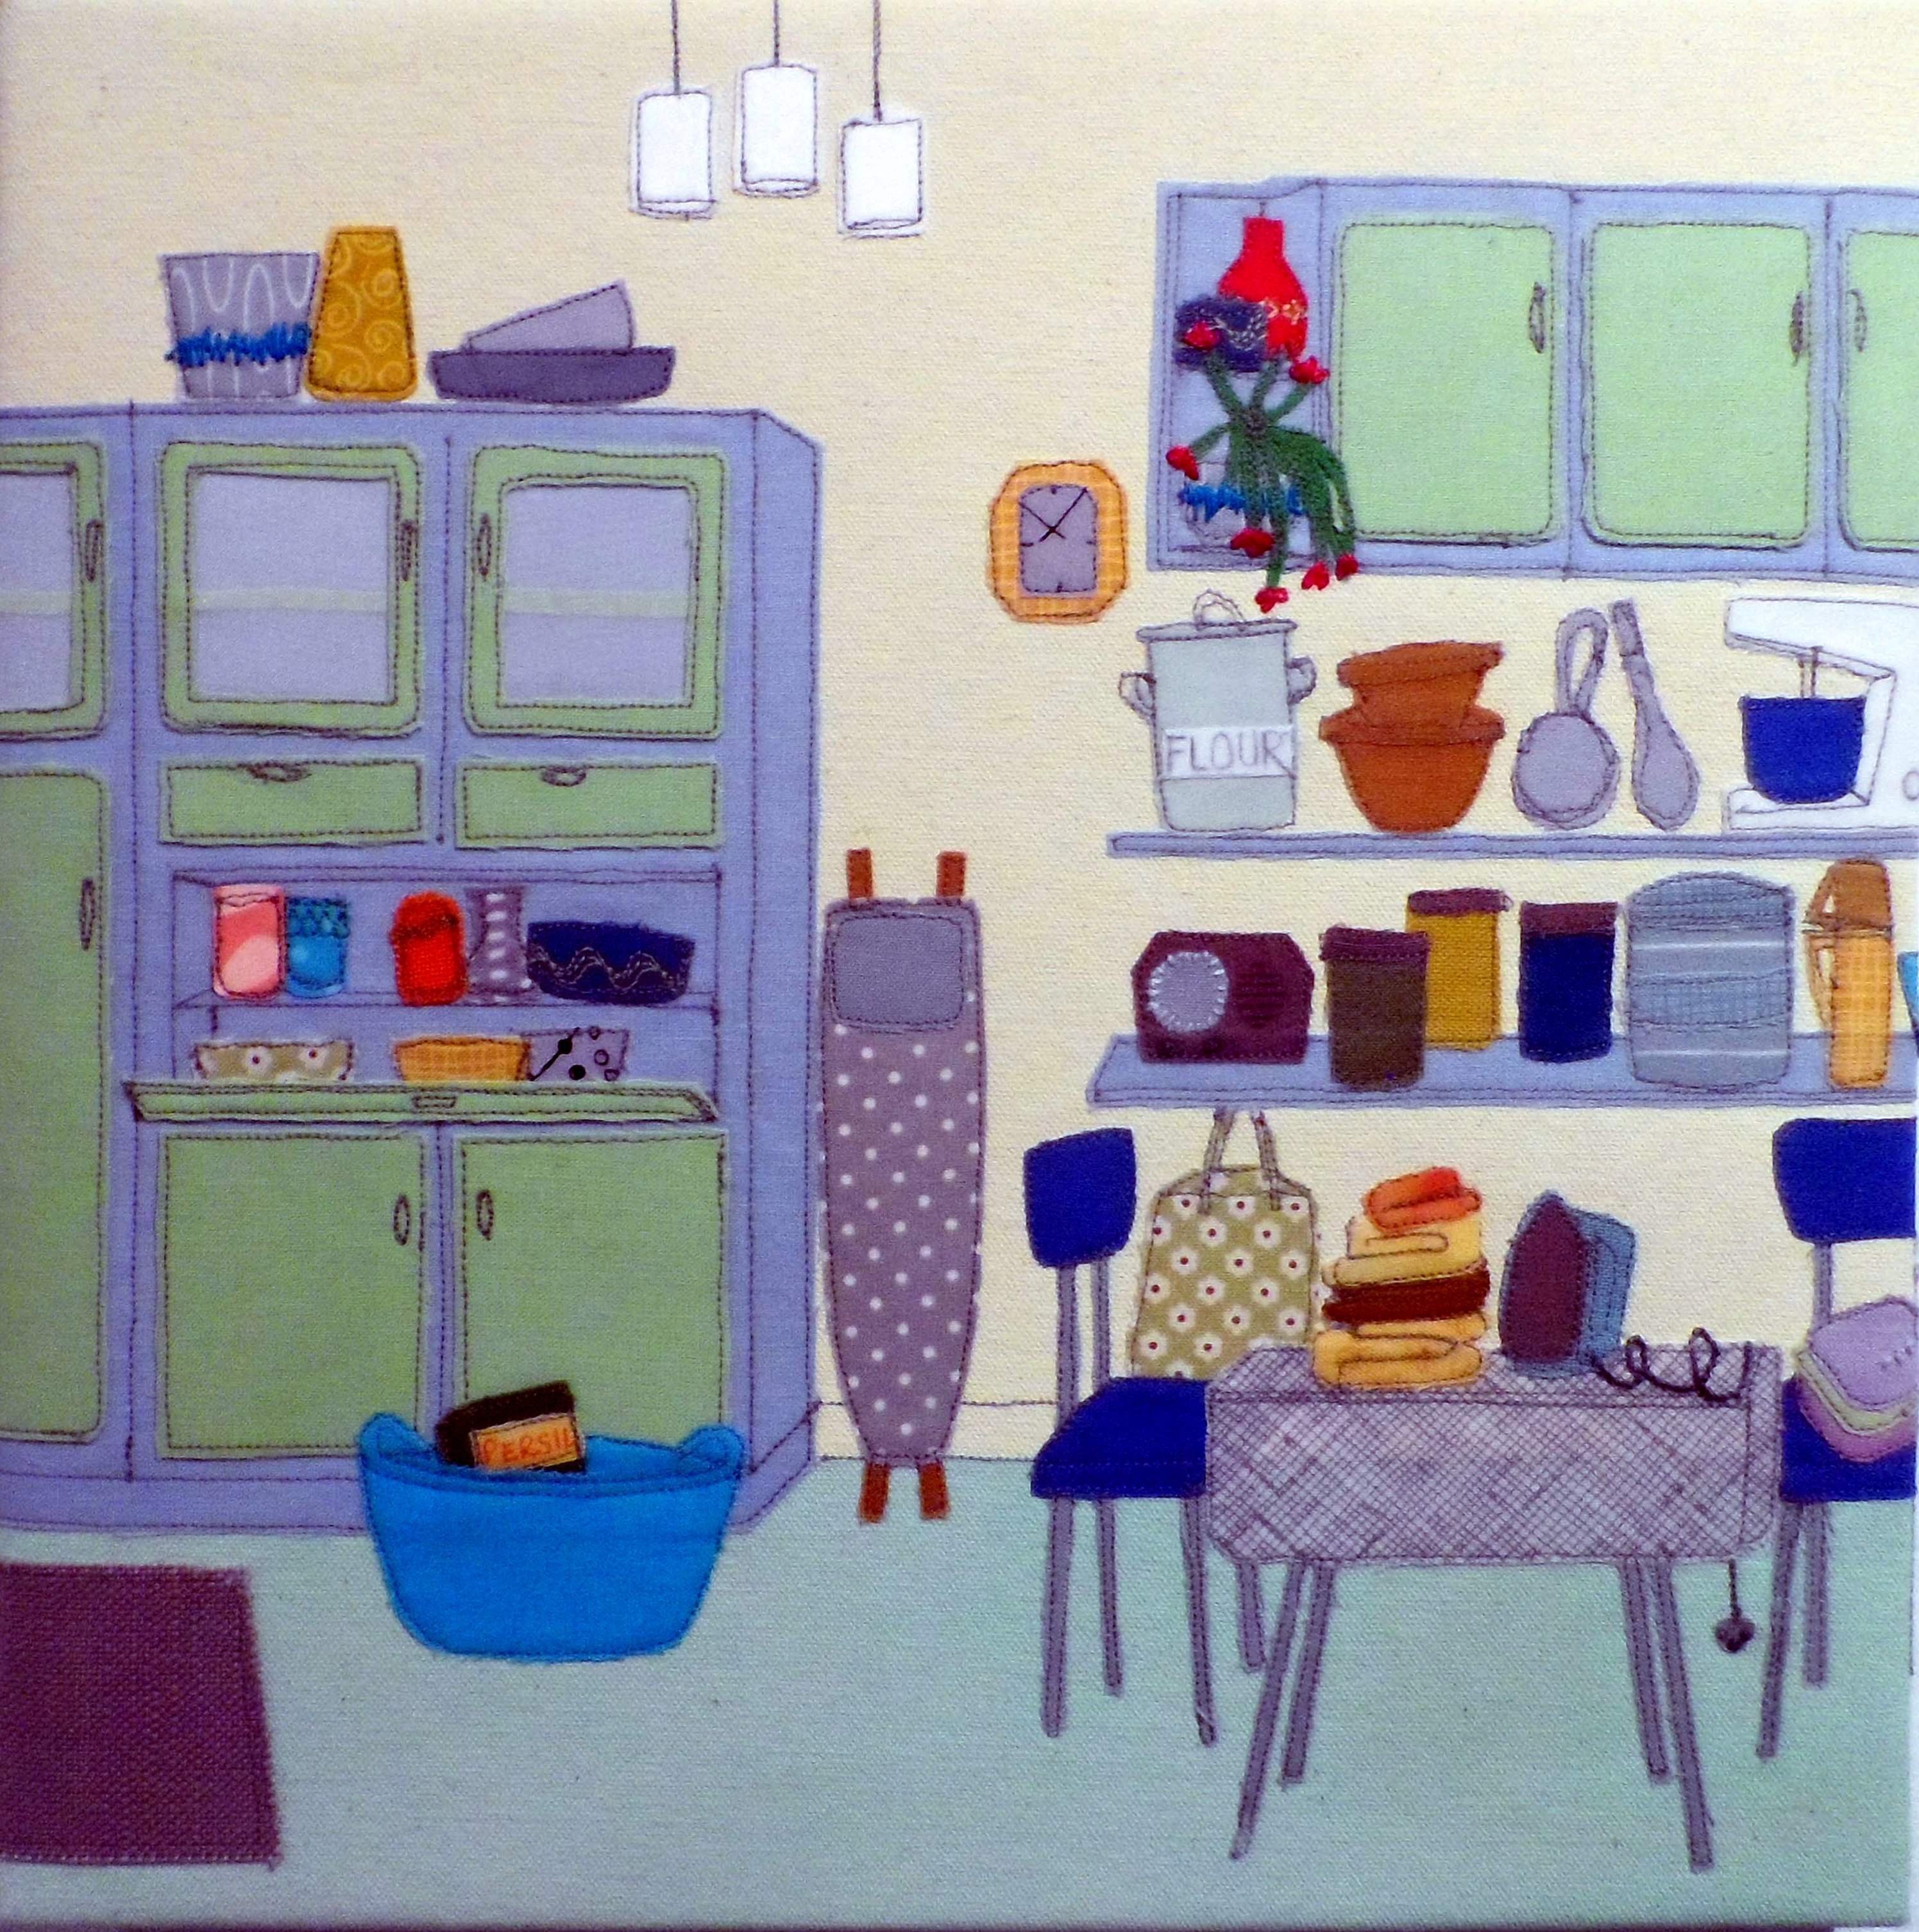 RETRO KITCHEN by Linda Young, applique and hand stitch